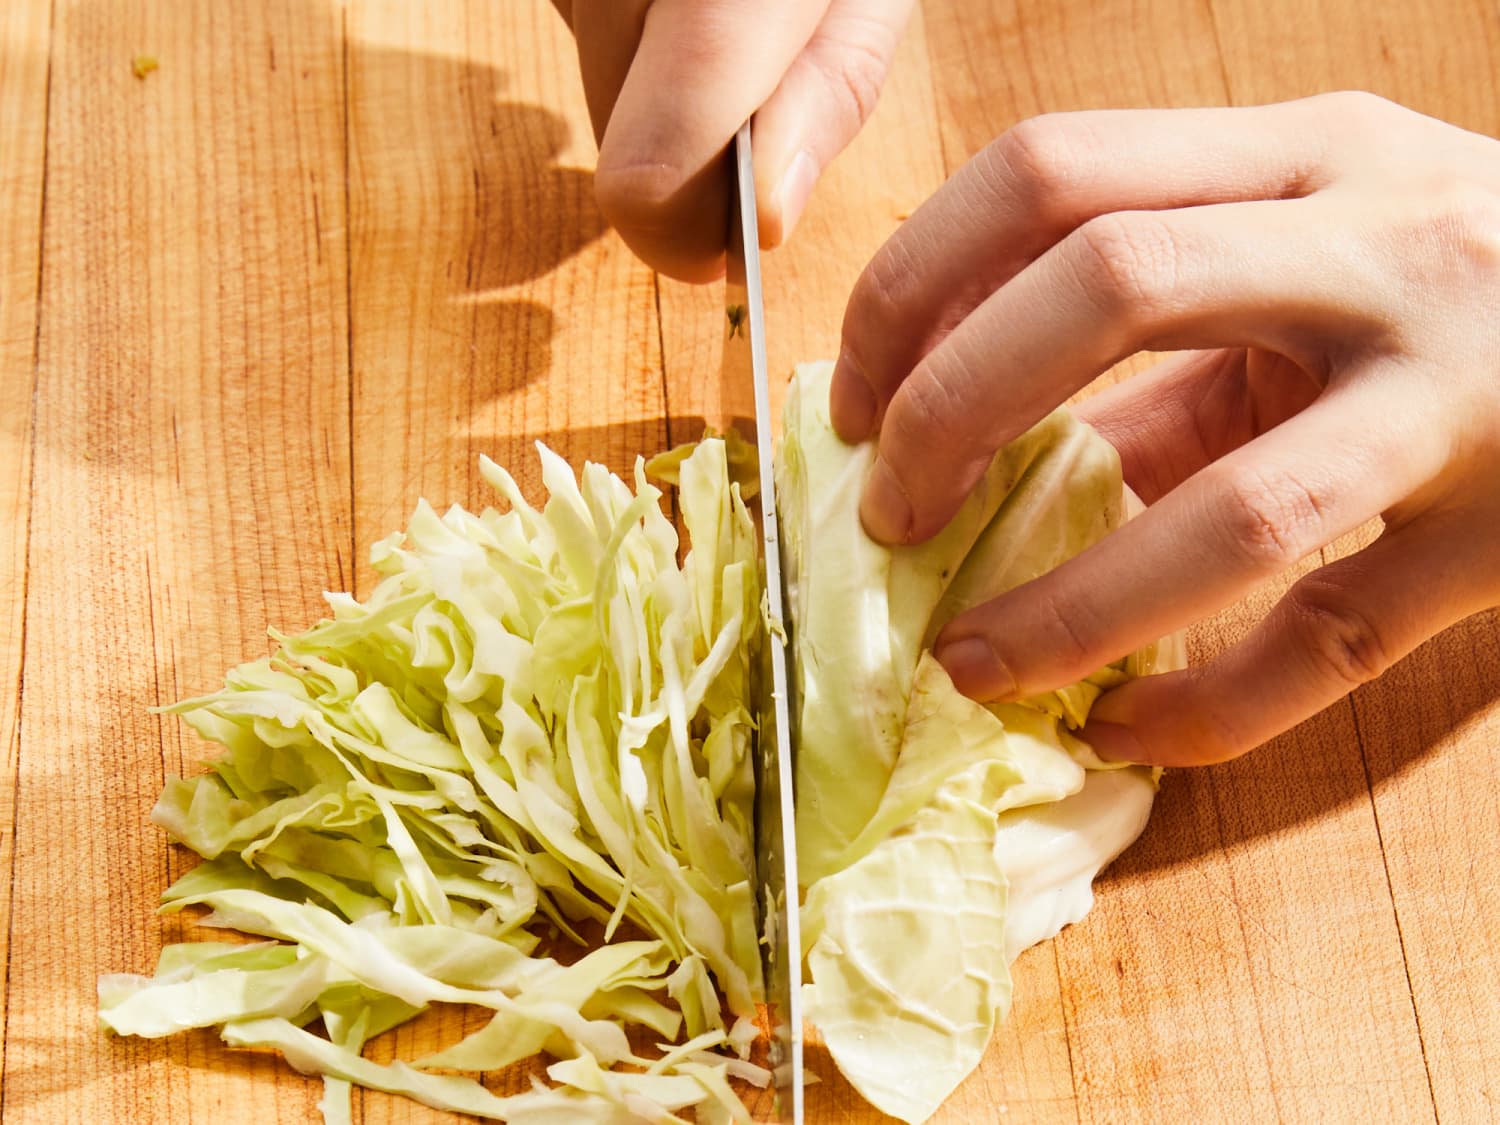 https://cdn.apartmenttherapy.info/image/upload/f_jpg,q_auto:eco,c_fill,g_auto,w_1500,ar_4:3/k%2FPhoto%2FTips%2F2023-02-How-to-Cut-Cabbage%2FHow-to-cut-cabbage-250